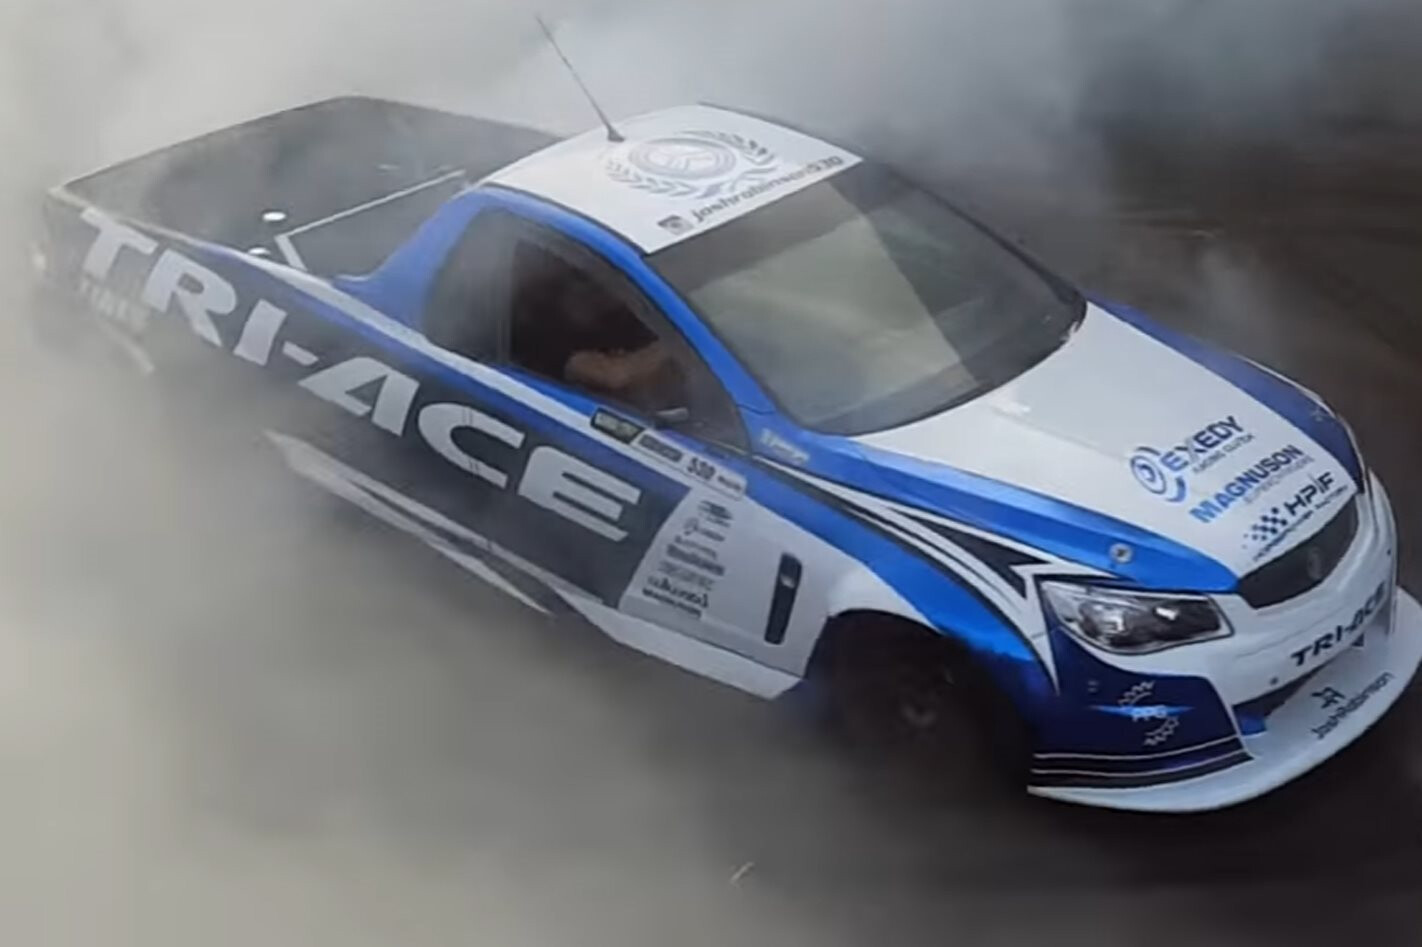 FORMULA DRIFT CARBON-BODIED HOLDEN COMMODORE UTE – VIDEO